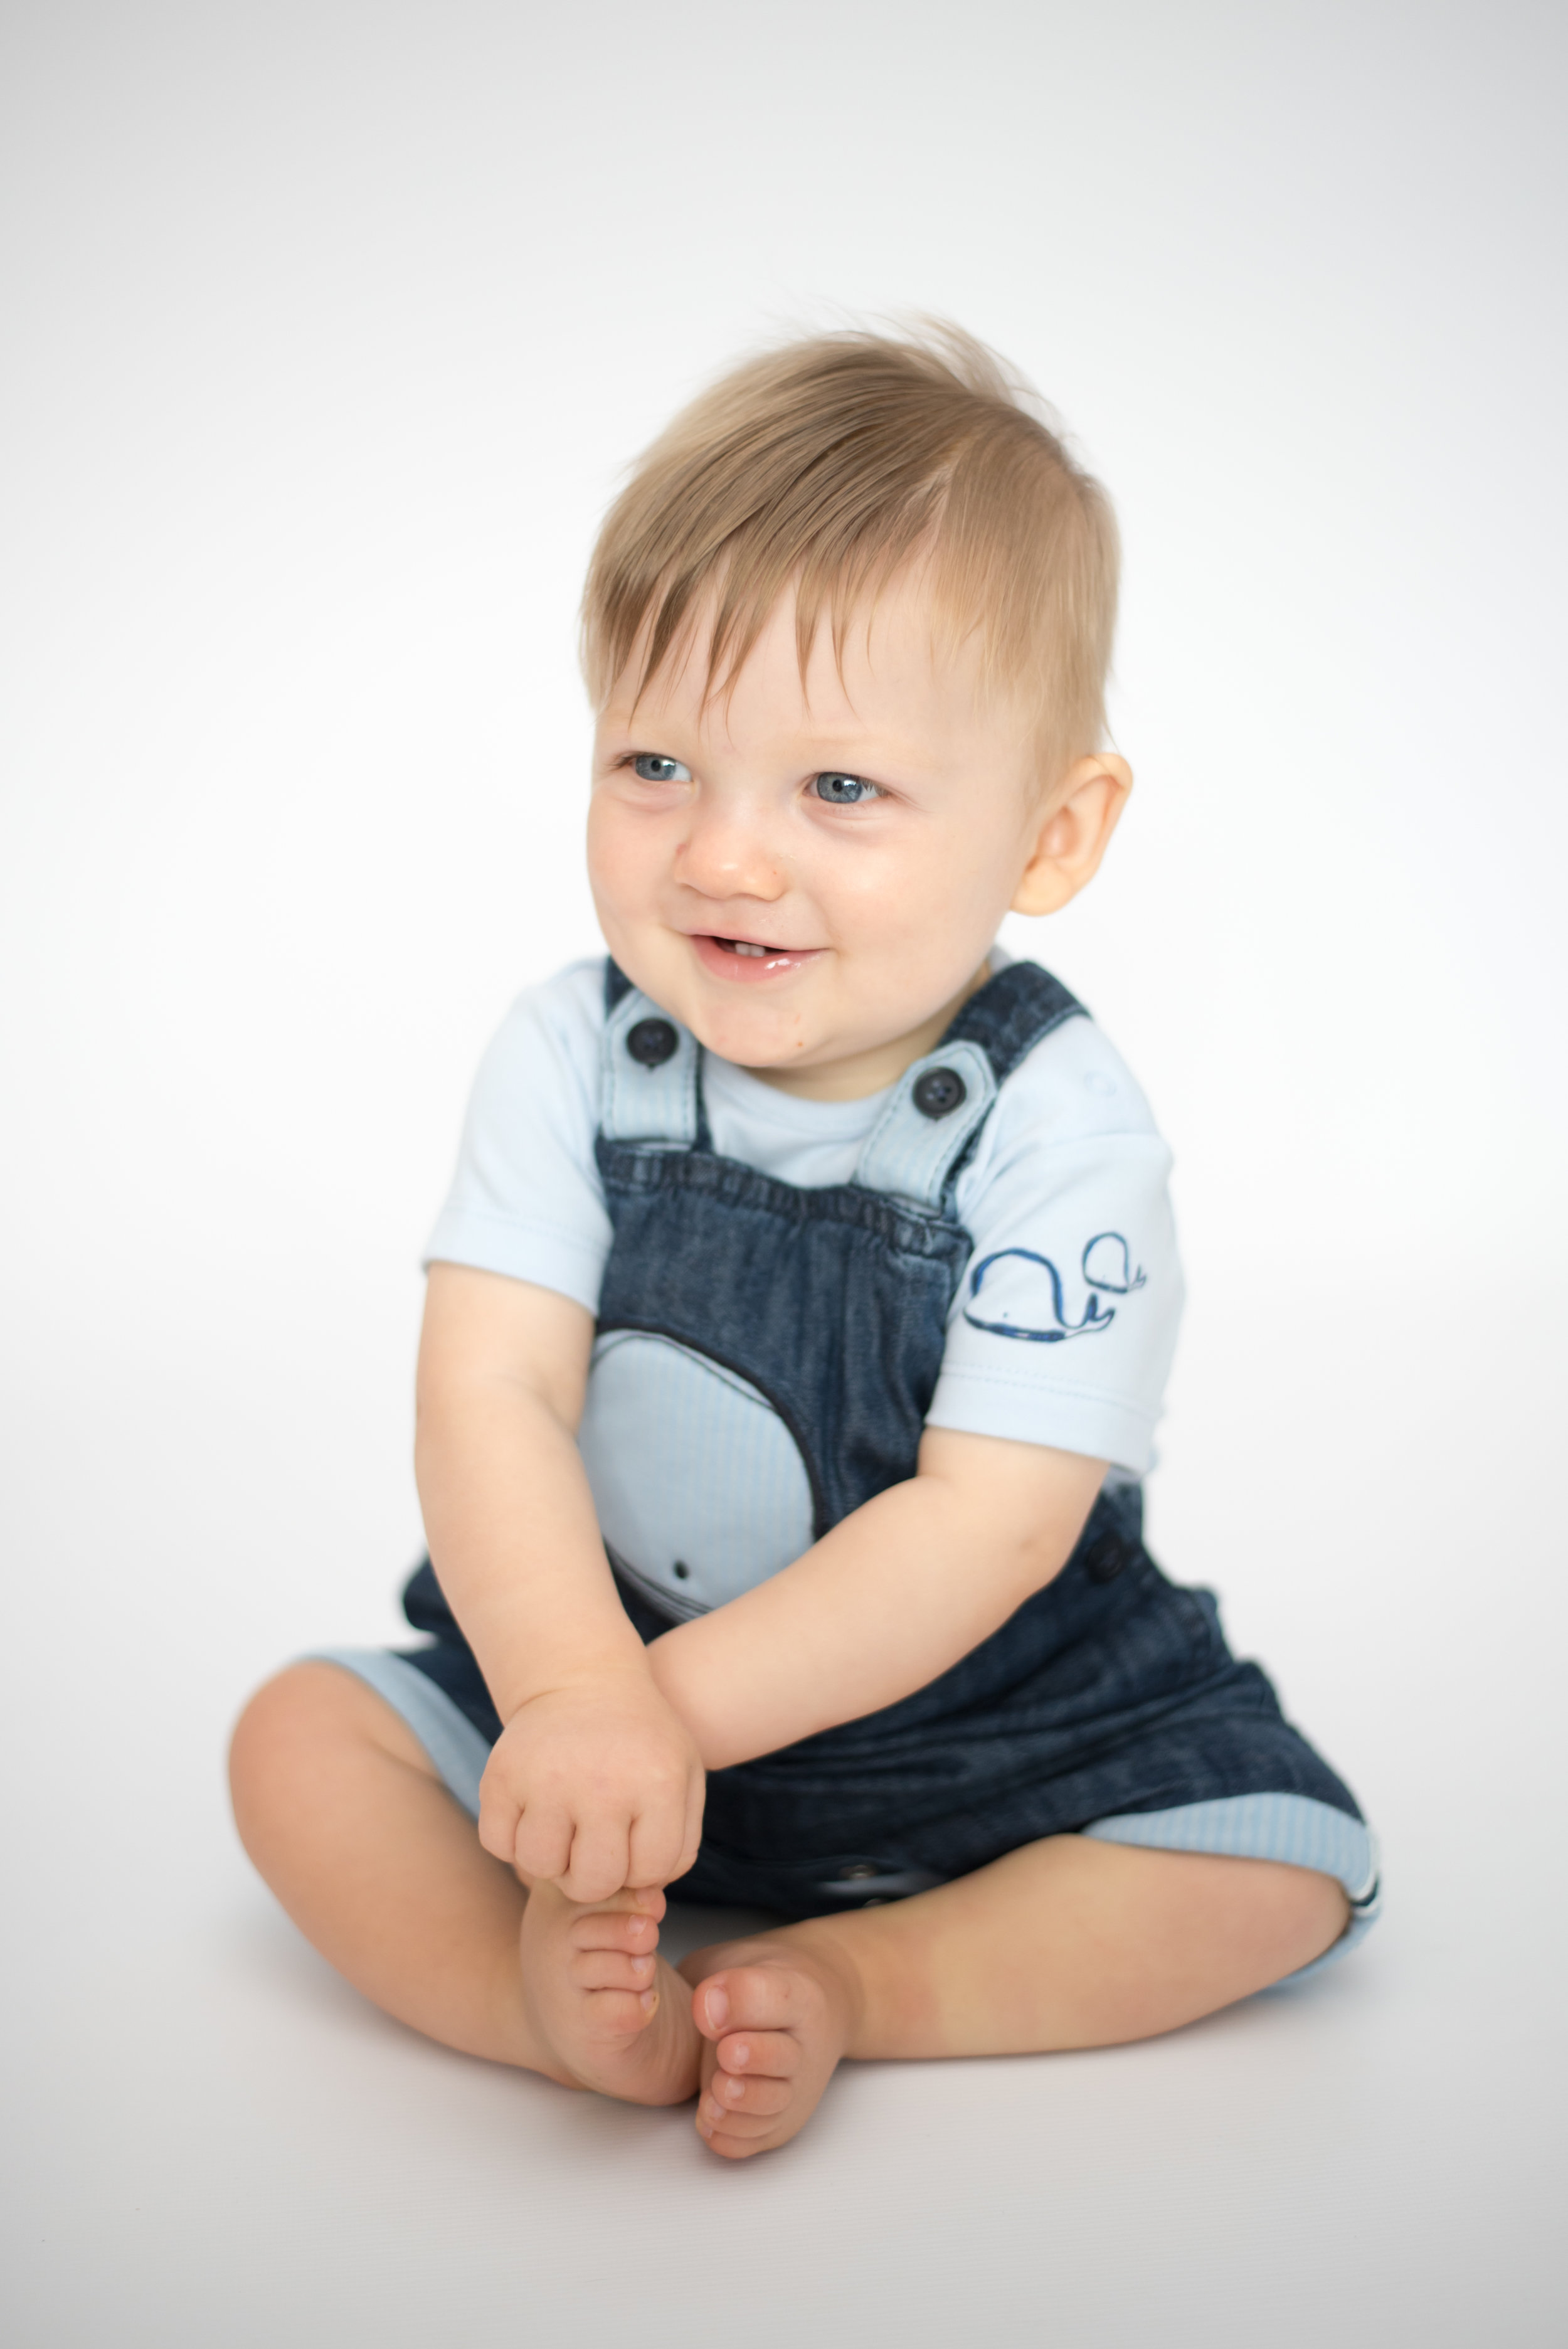 A sitter session with 9 month old Harry - Ribble Valley, Lancashire ...